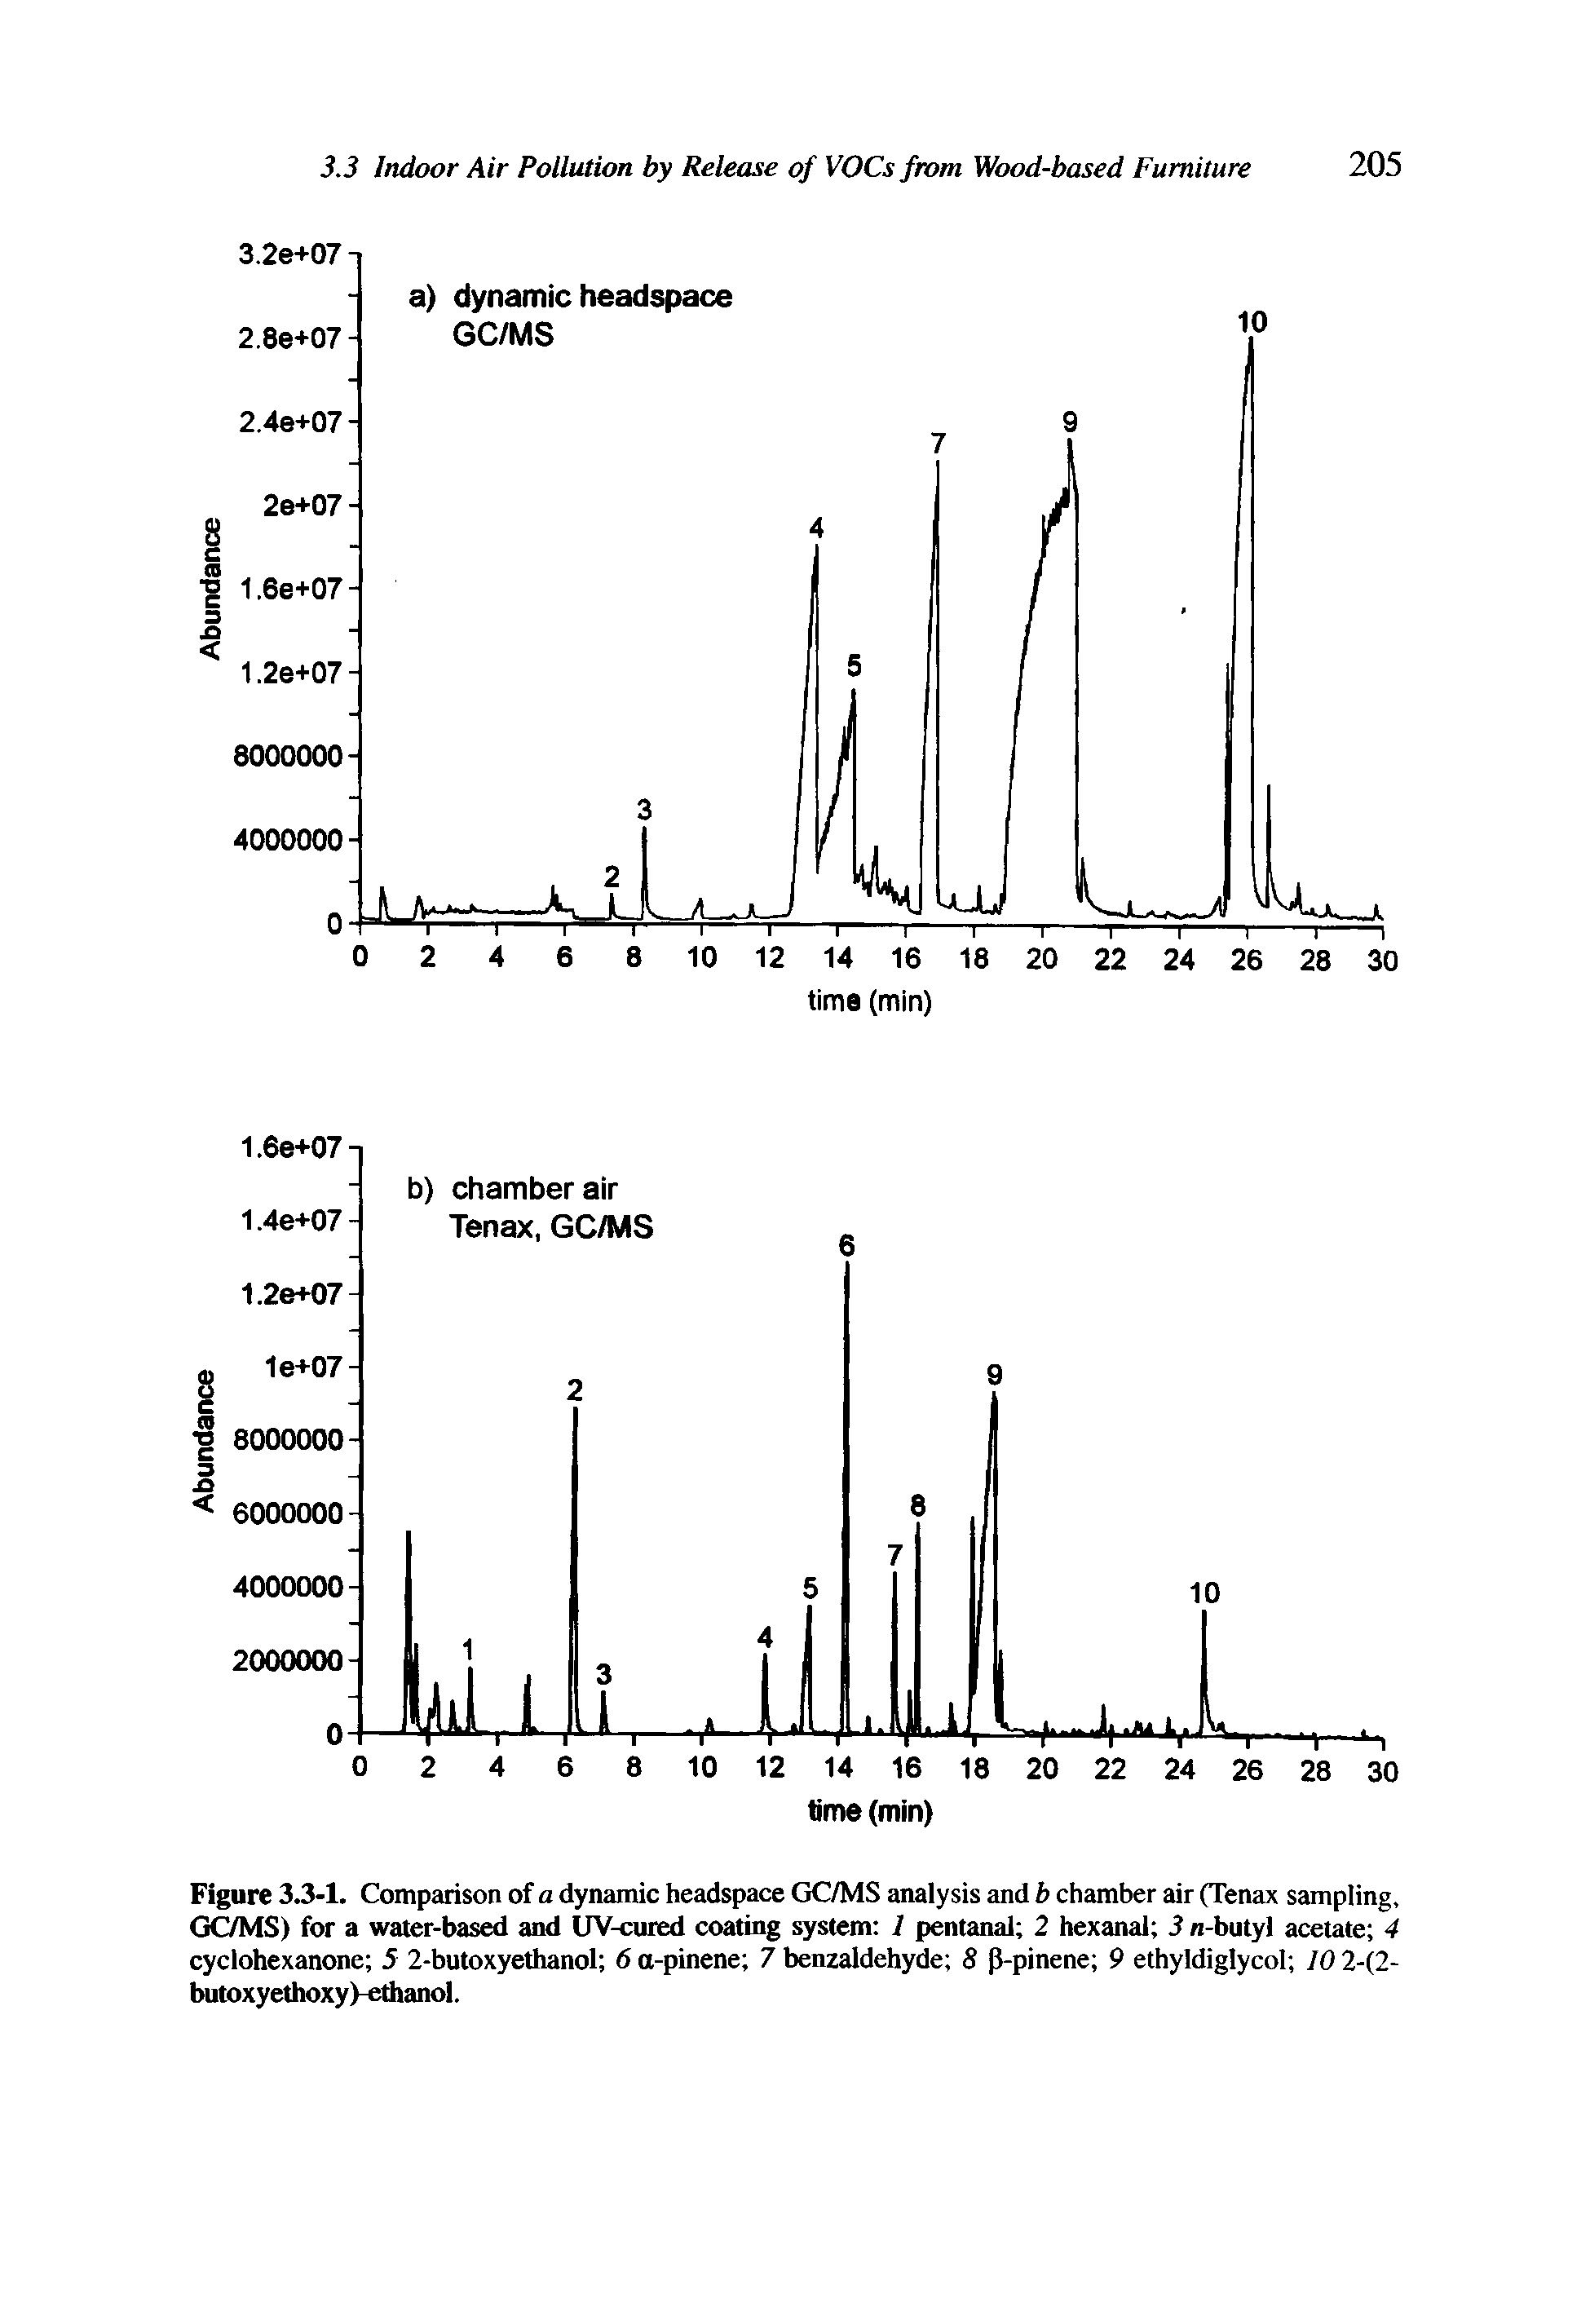 Figure 3.3-1. Comparison of a dynamic headspace GC/MS analysis and b chamber air (Tenax sampling, GC/MS) for a water-based and UV-cured coating system 1 pentanal 2 hexanal 3 n-butyl acetate 4 cyclohexanone 5 2-butoxyethanol 6 a-pinene 7 benzaldehyde 8 3-pinene 9 ethyldiglycol 10 2-(2-butoxyethoxy)-ethanol.